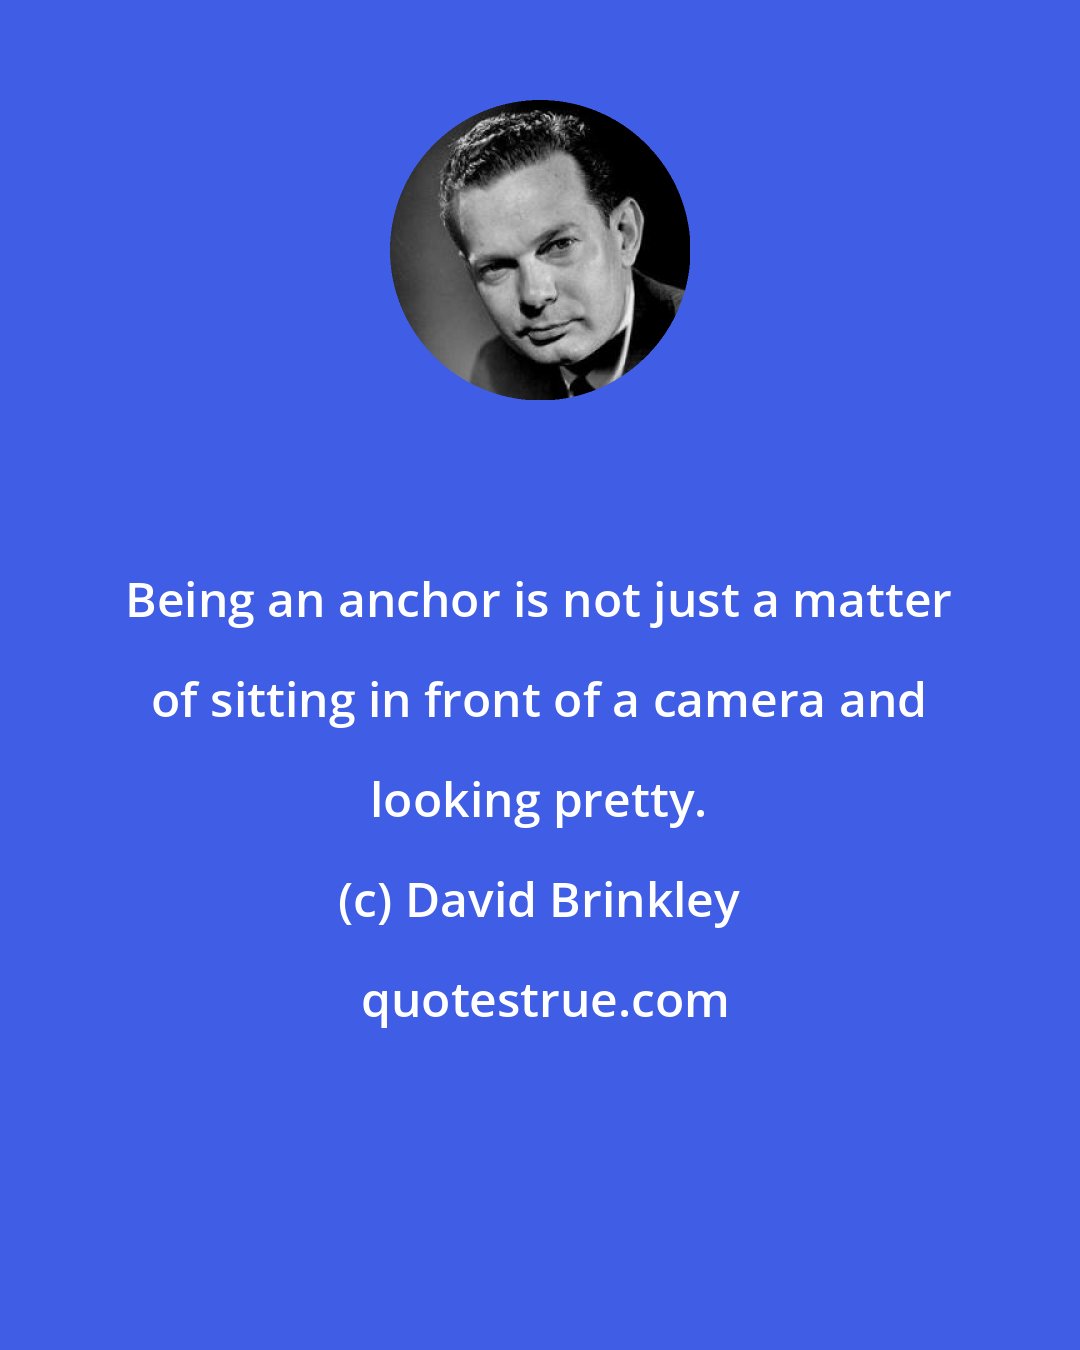 David Brinkley: Being an anchor is not just a matter of sitting in front of a camera and looking pretty.